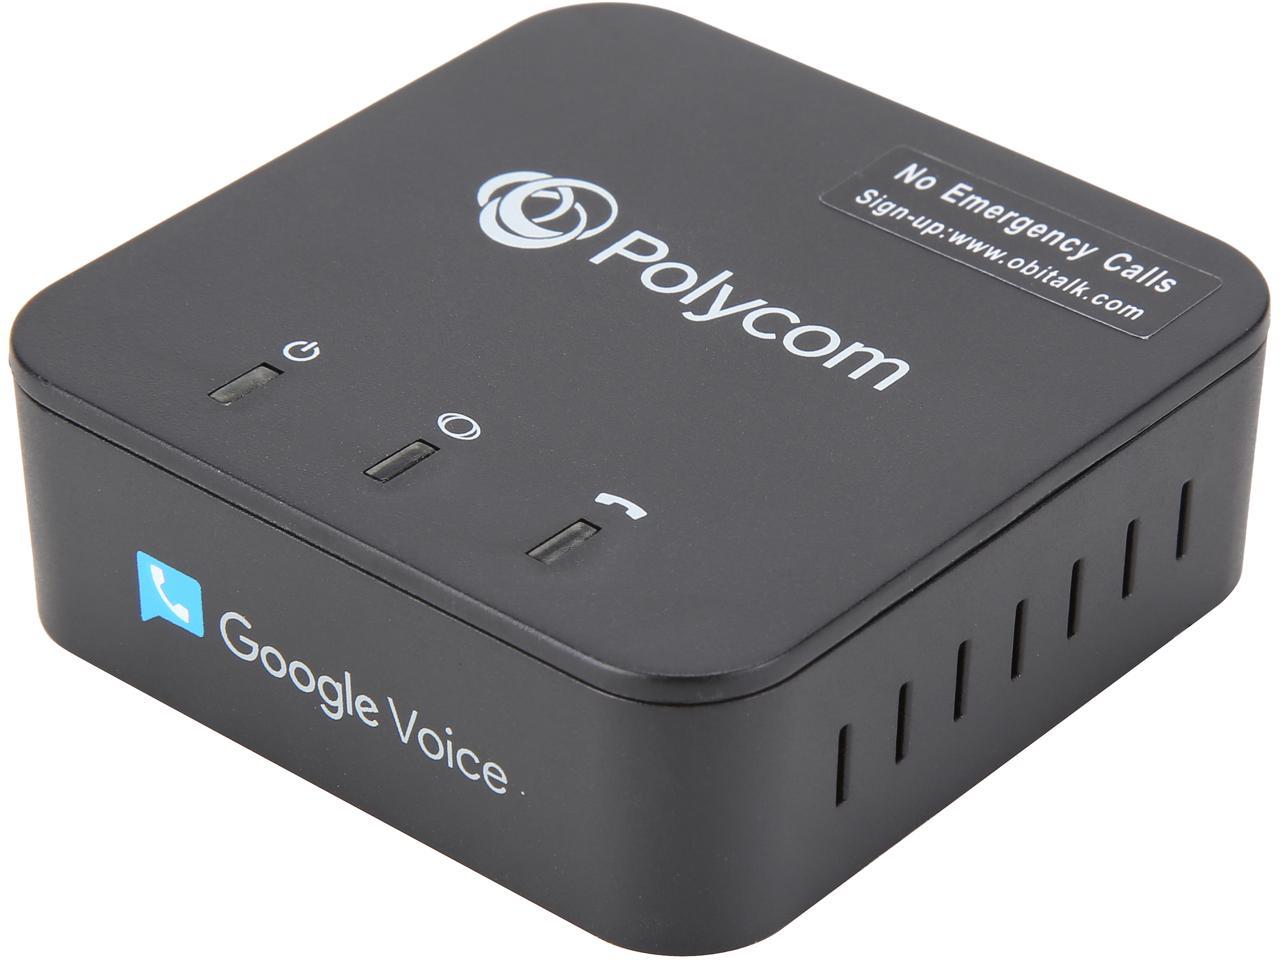 Polycom OBi200 VoIP Telephone Adapter with Google Voice & SIP @Newegg $37